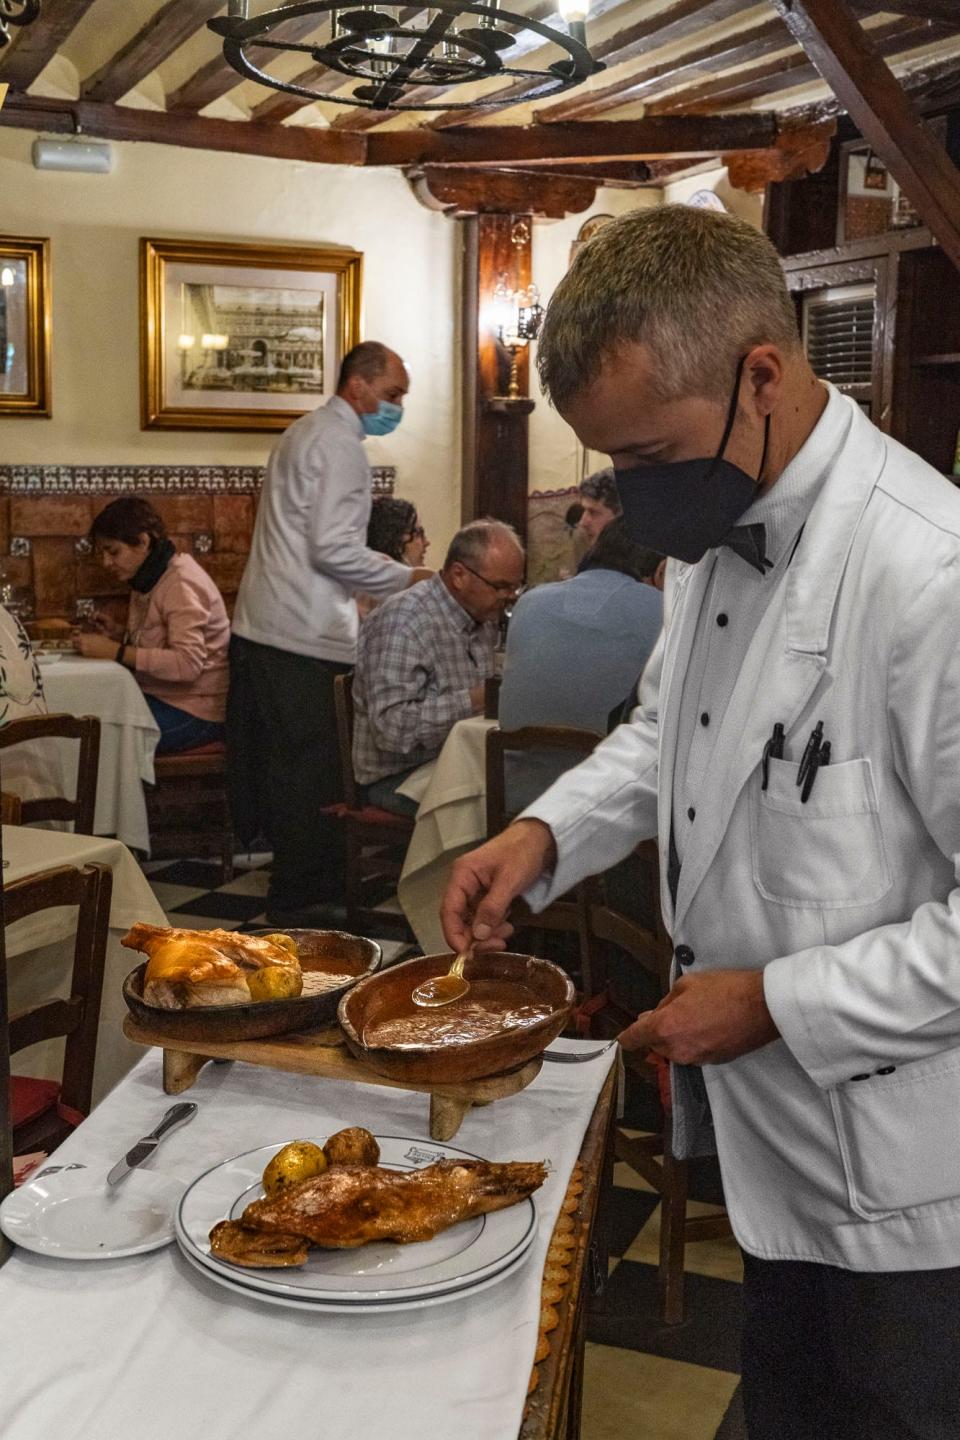 A waiter serving food at a table.